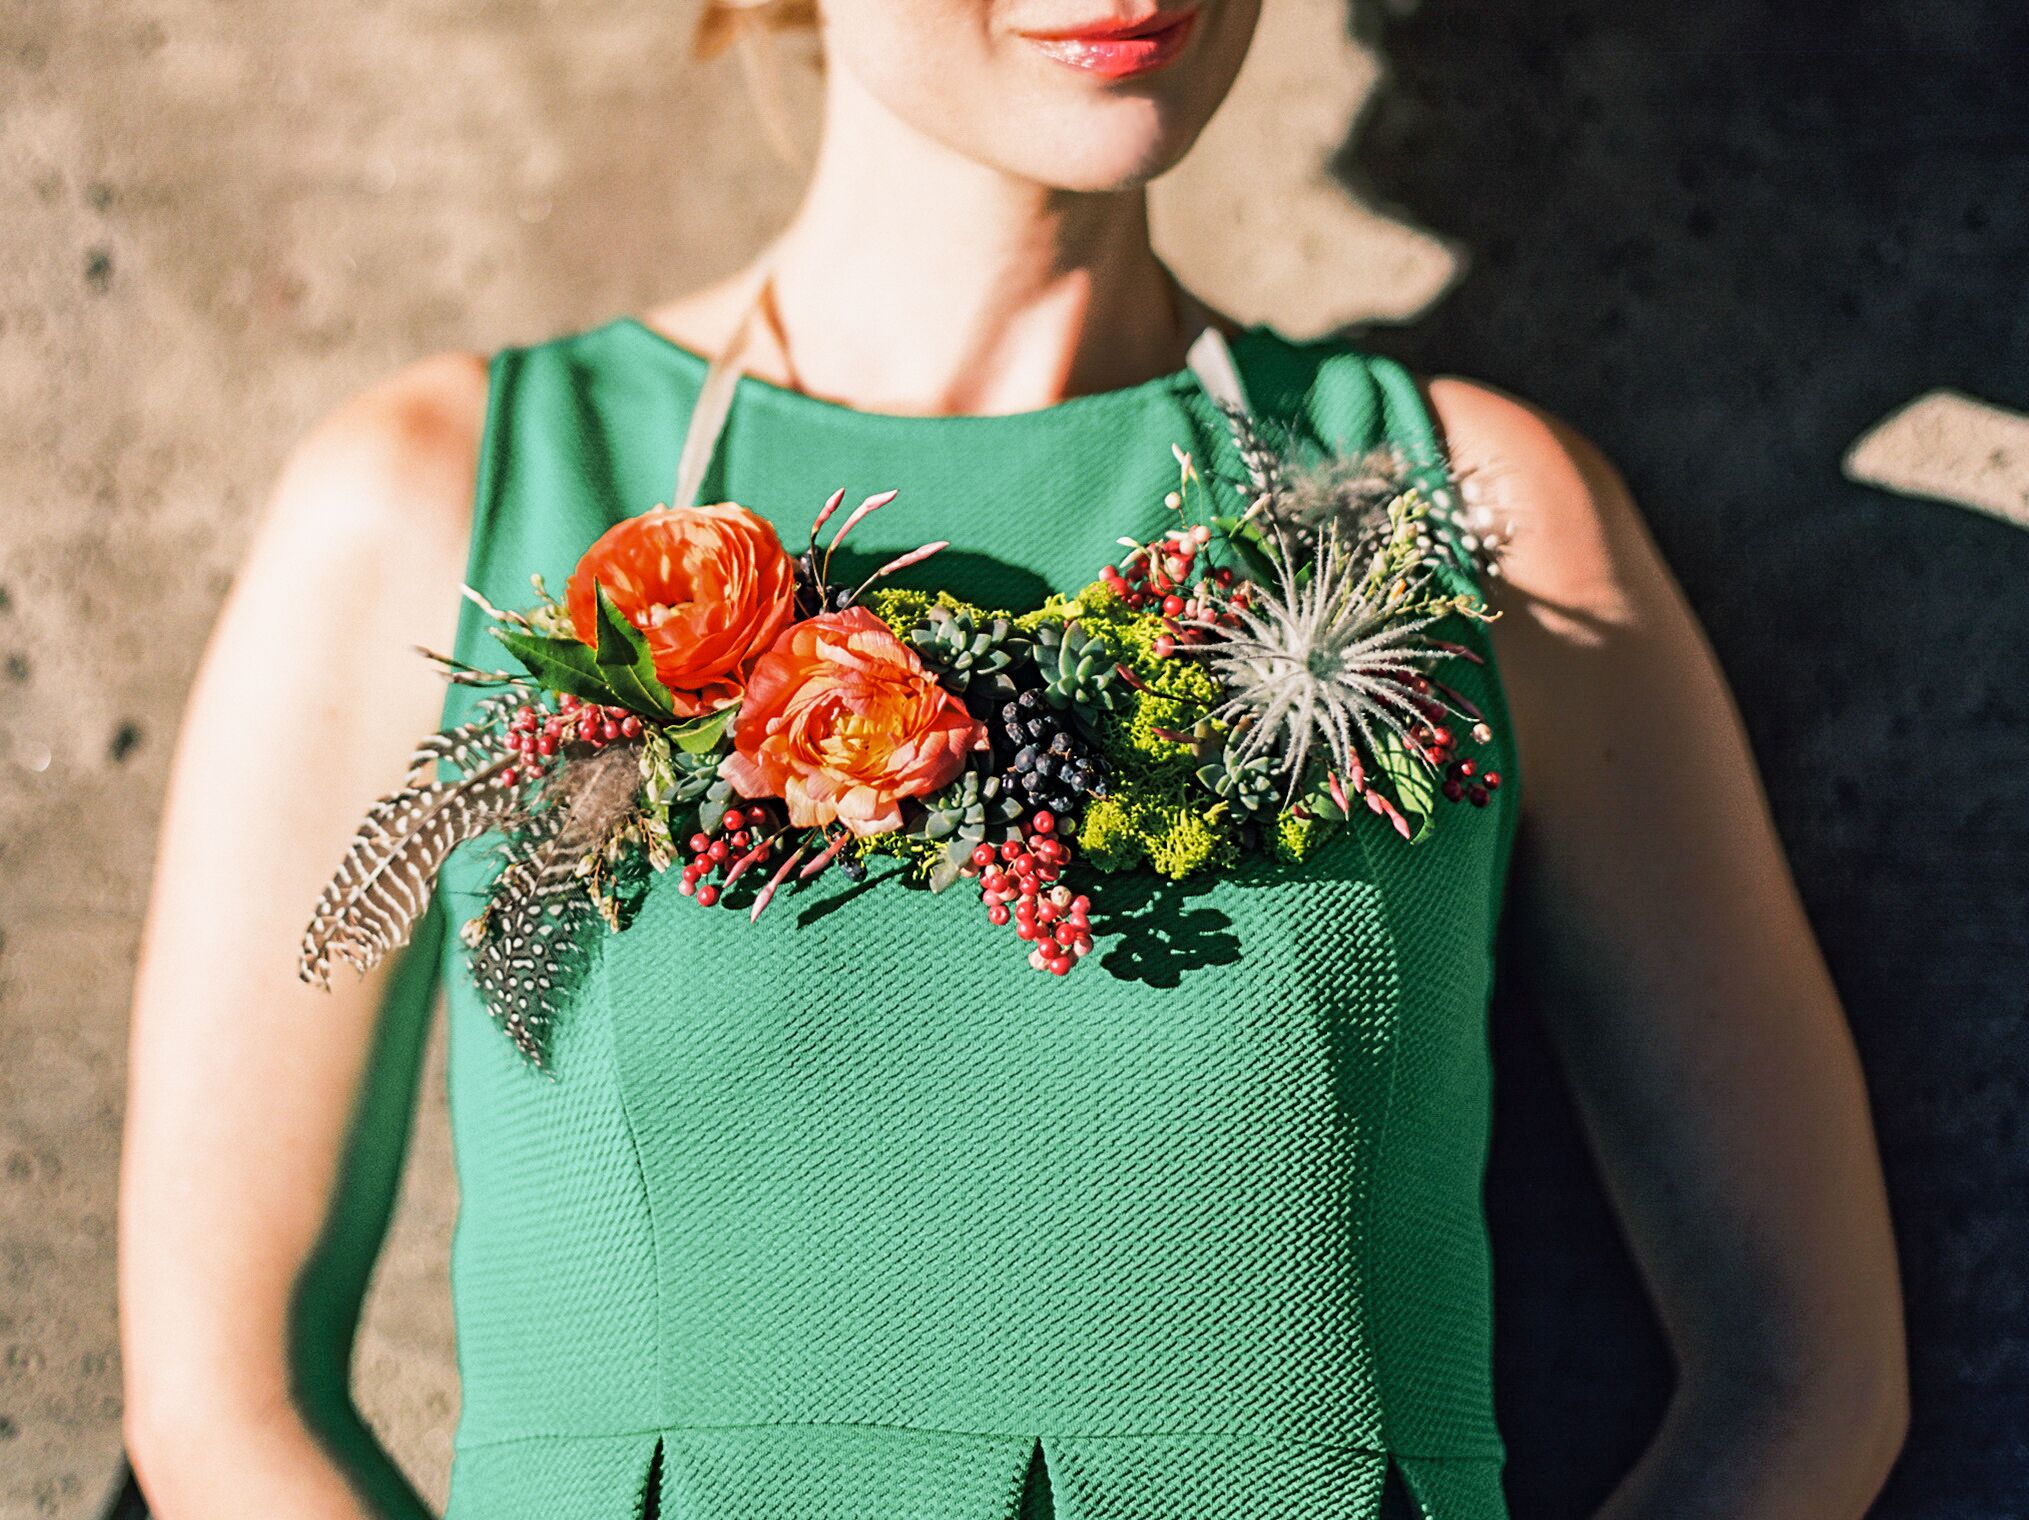 Flower necklace with ranunculus, greenery, and succulents